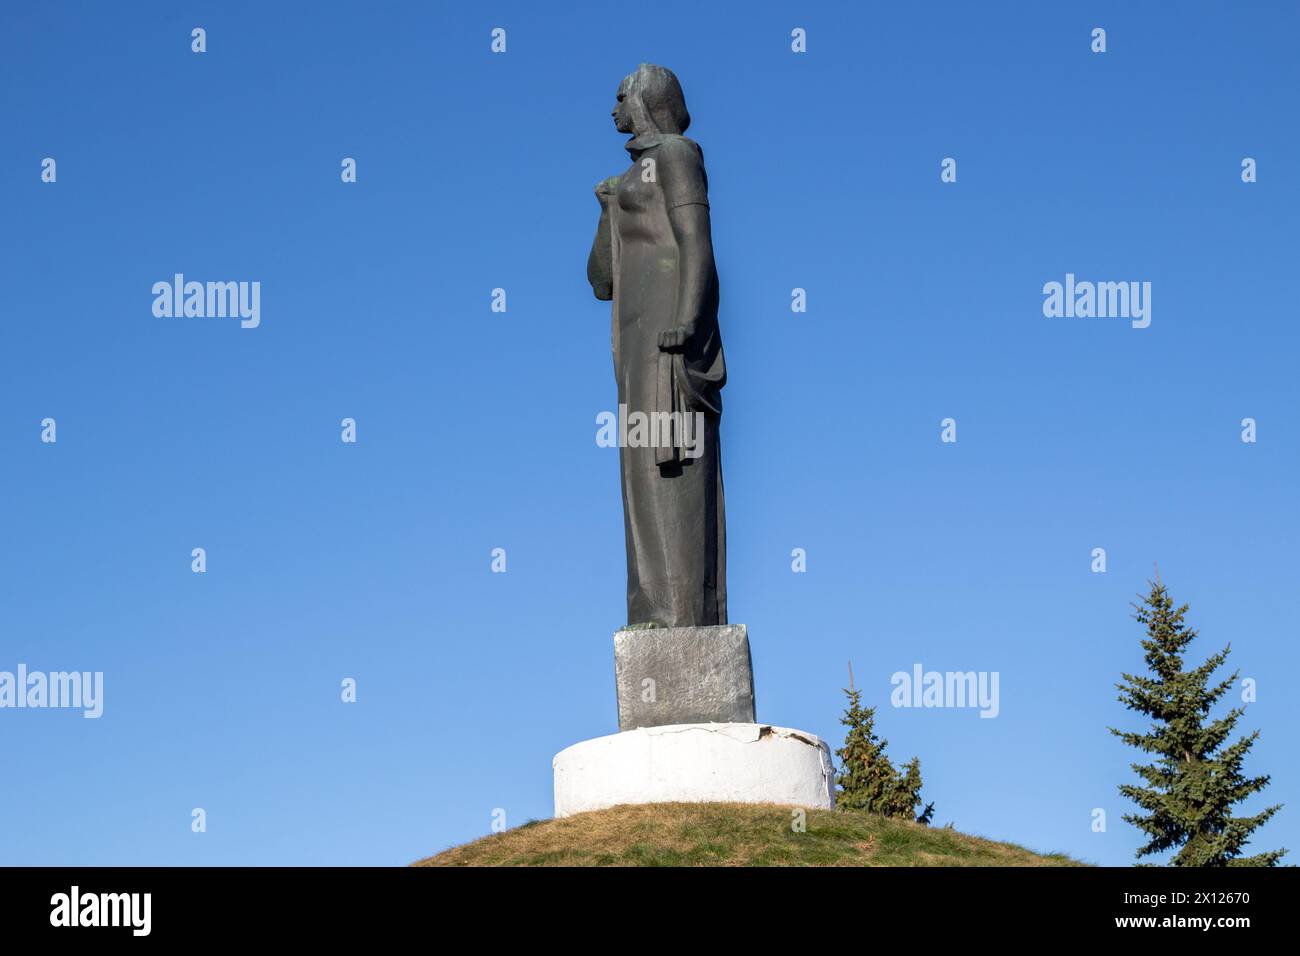 Maloyaroslavets, Russia - April 2018: The military grave of the Great Patriotic War of 1941-1945 and the memorial The Sorrowful Mother in Maloyaroslav Stock Photo